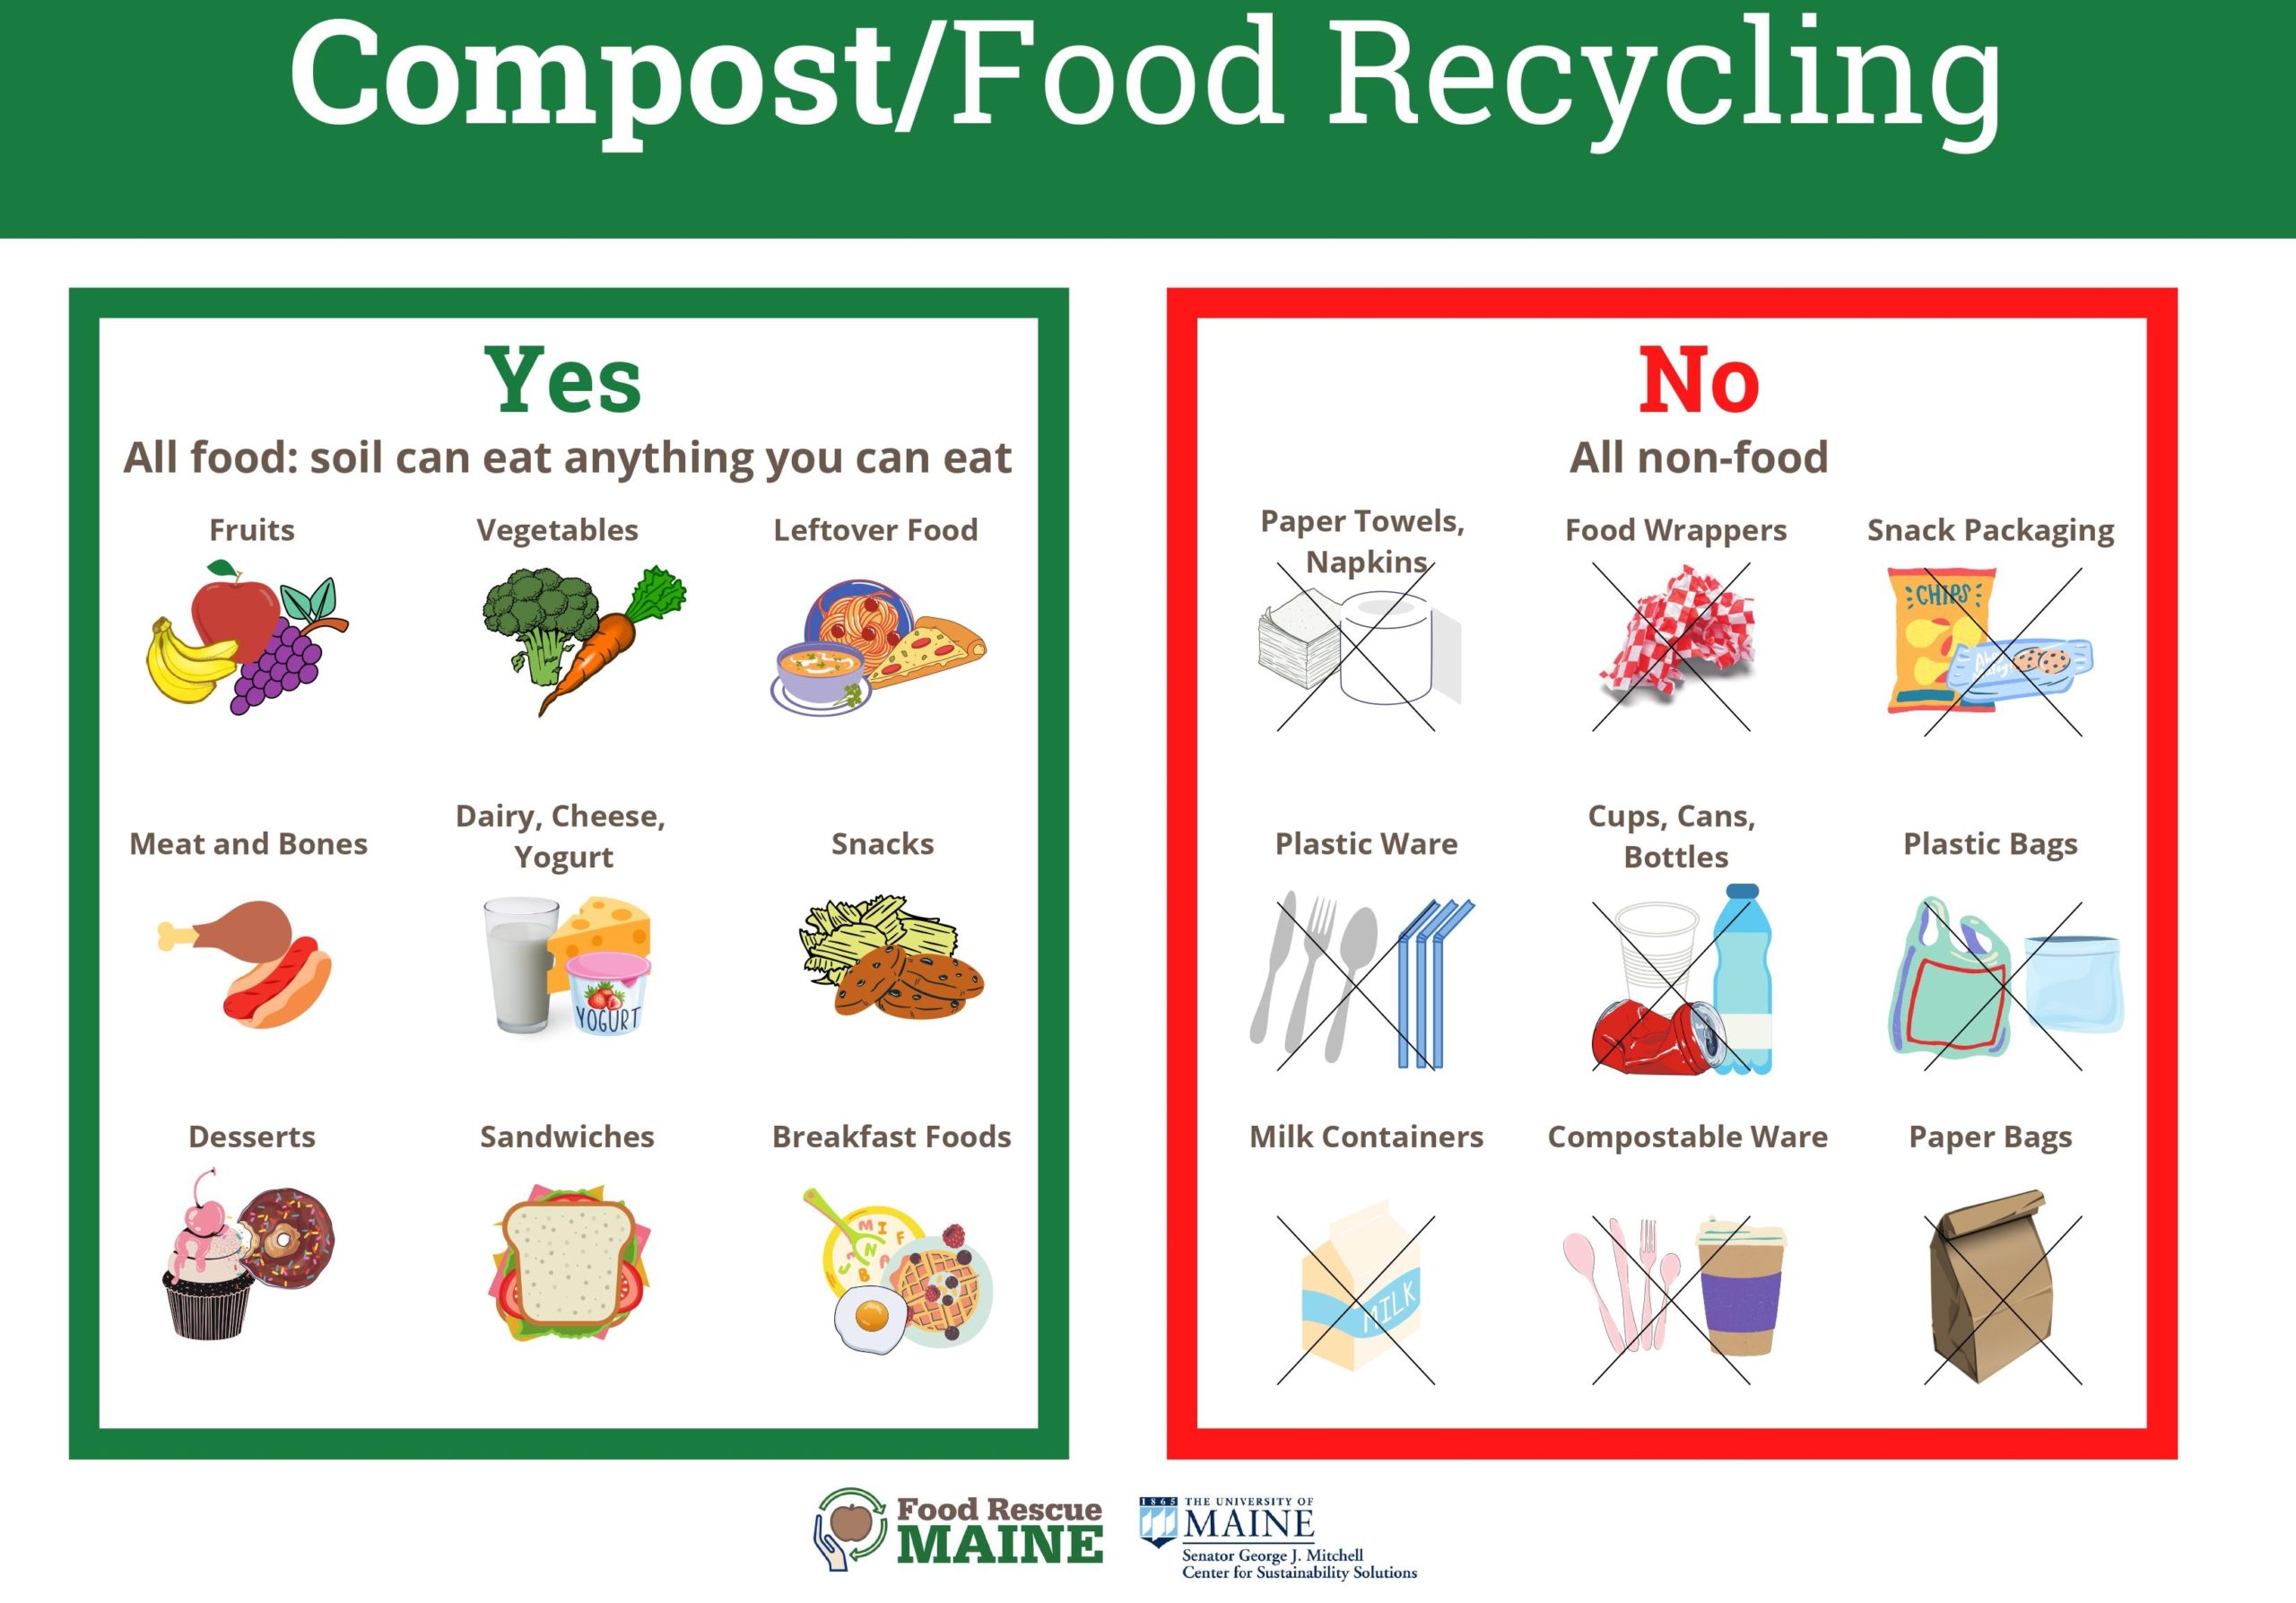 A graphic showing what can and cannot be composted. Items that can food items such as fruits, vegetables, leftovers, meat and bones, dairy, cheese, yogurt, snacks, desserts, sandwiches and breakfast foods. Items that are not able to be composted include paper towels, napkins, food wrappers, snack packaging, plastic ware, cups, cans, bottles, plastic bags, milk containers, compostable ware and paper bags.